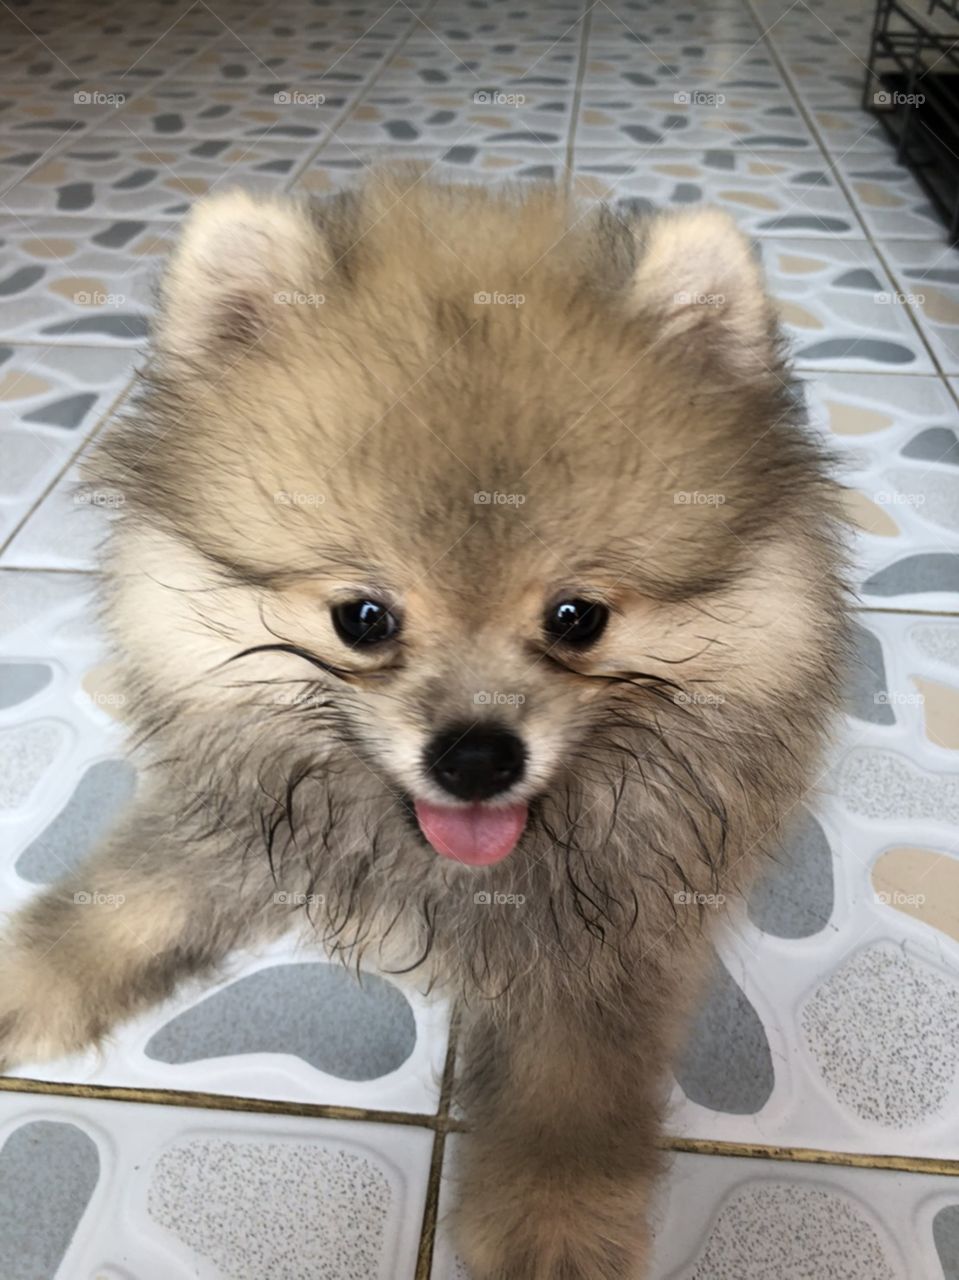 the hair on the face of puppy "pomeranian" wet from water she eat.